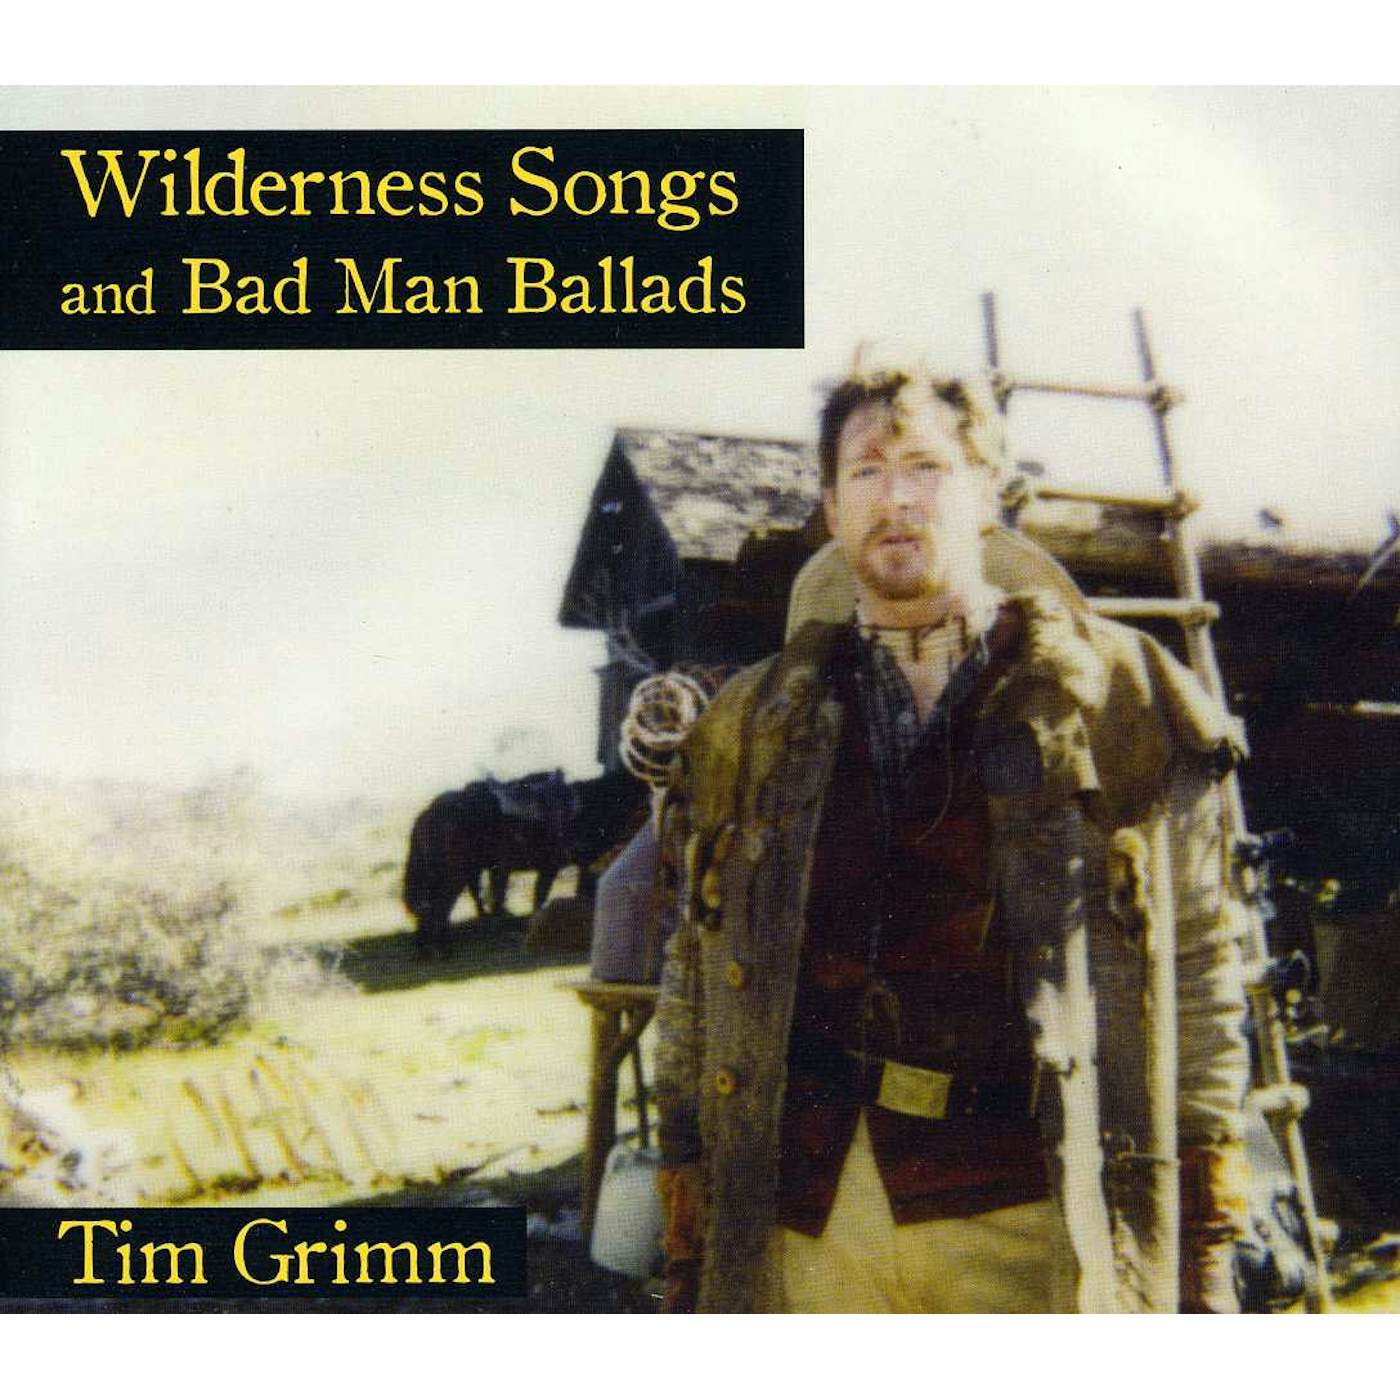 Tim Grimm WILDERNESS SONGS AND BAD MAN BALLADS CD